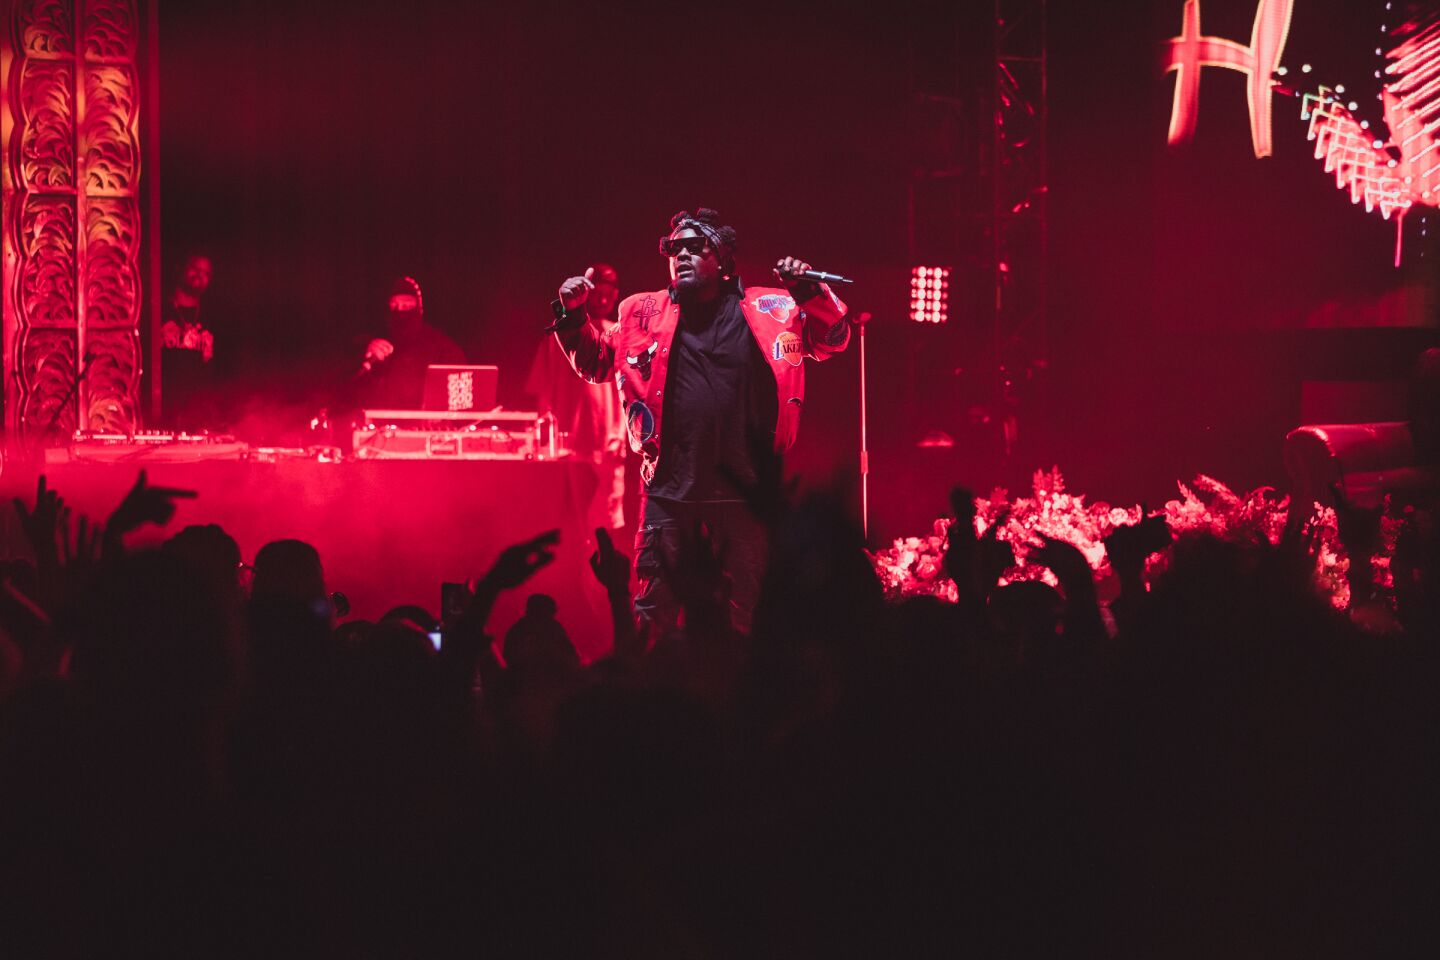 02.16.22 - Wale at Observatory (1)/Wale at Observatory 02-16-22 (15 of 27).jpg